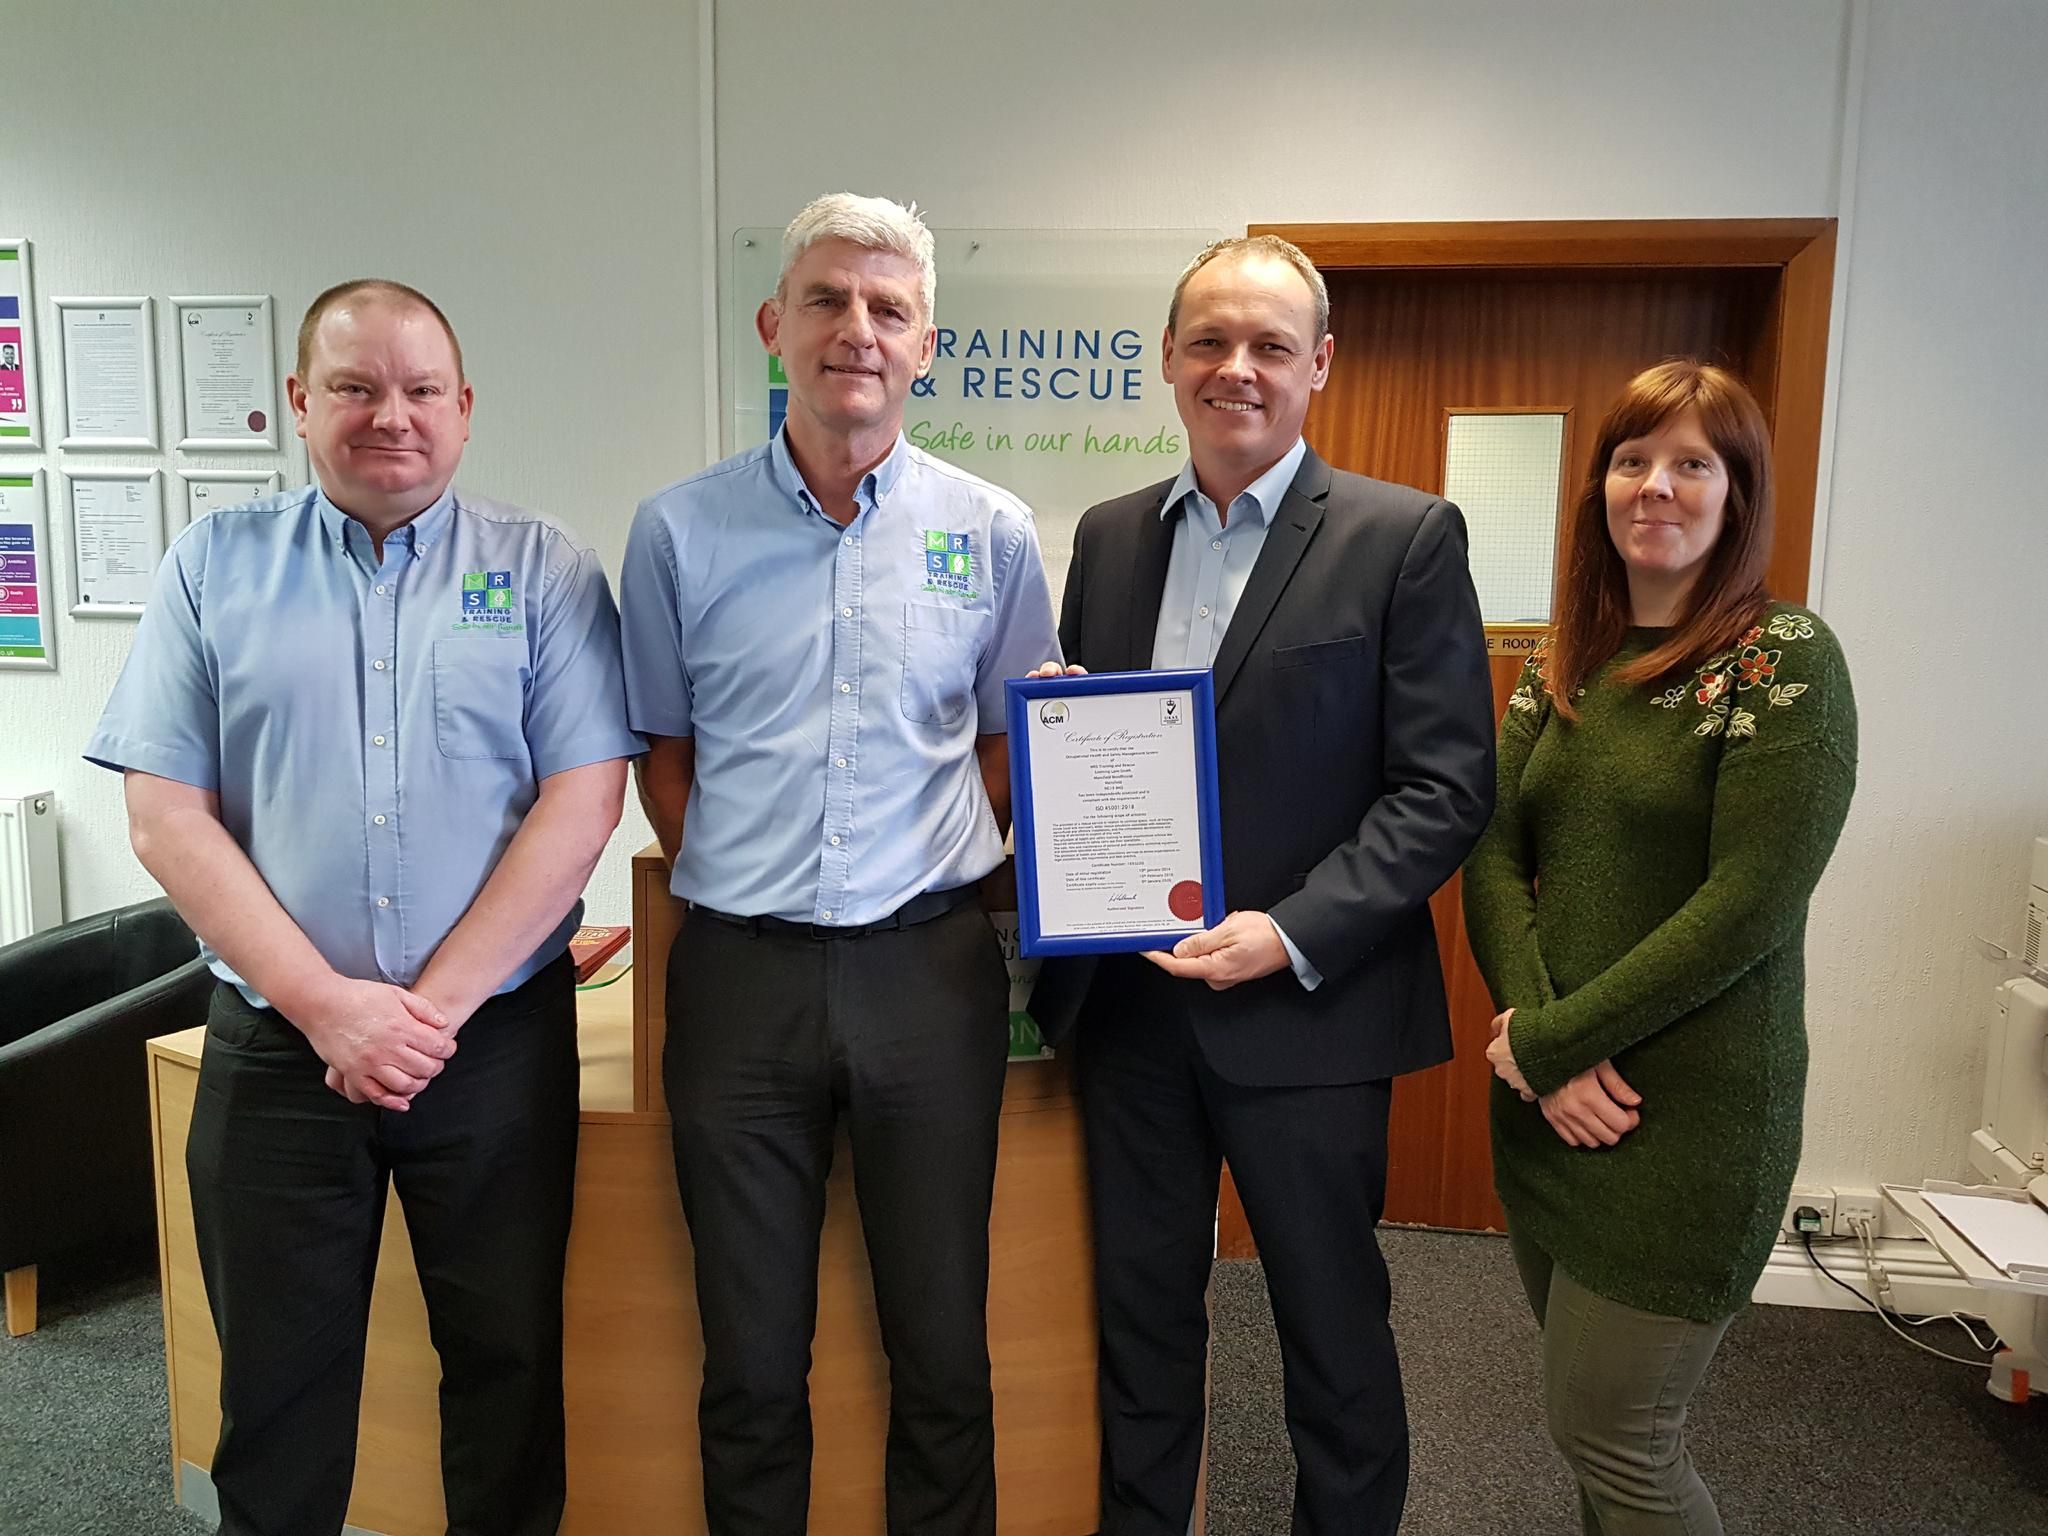 MRS Training & Rescue receive ISO 45001 certification